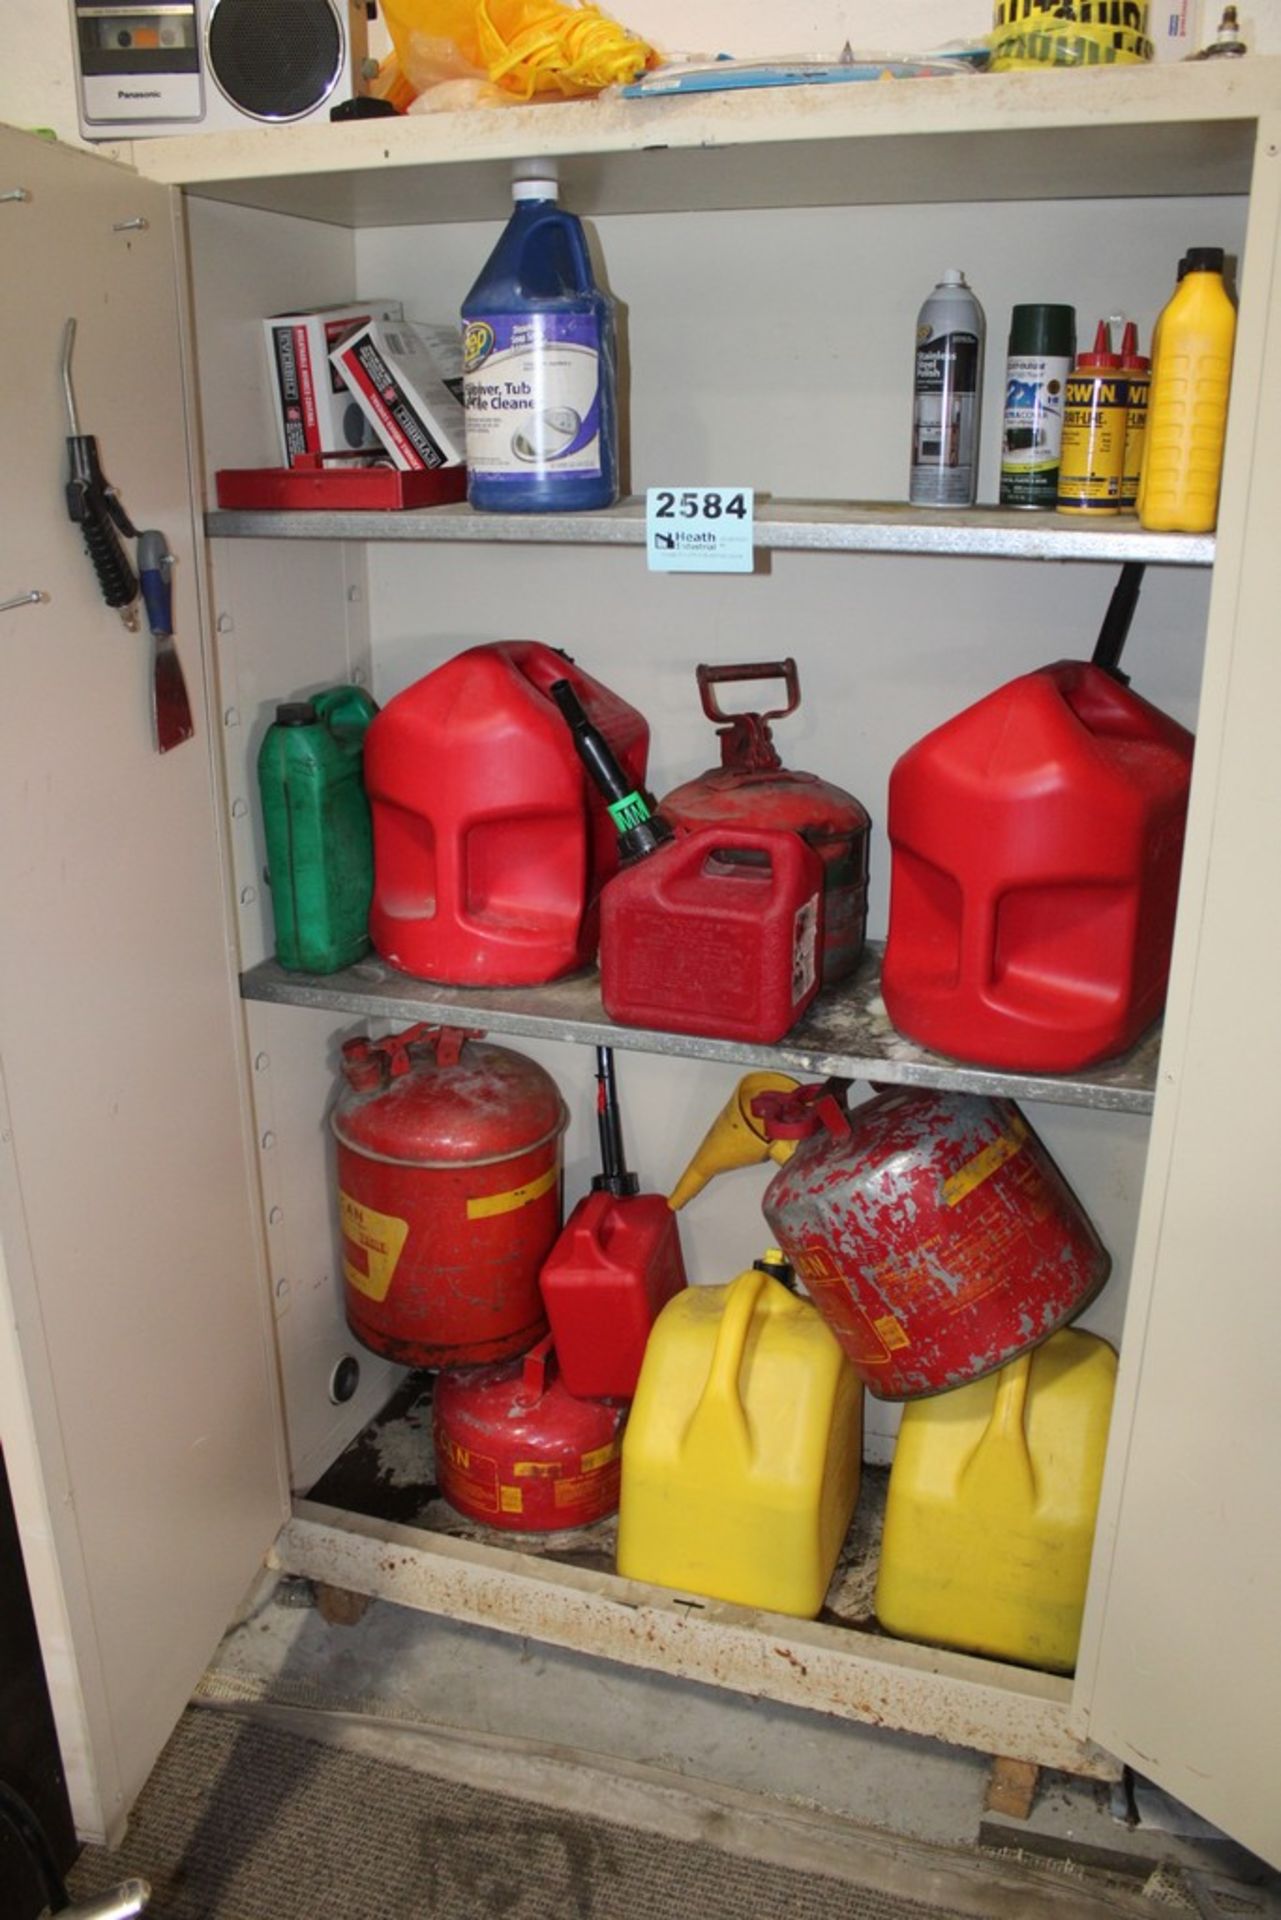 GAS CANS, OIL, CLEANER AND MISC. ITEMS IN CABINET